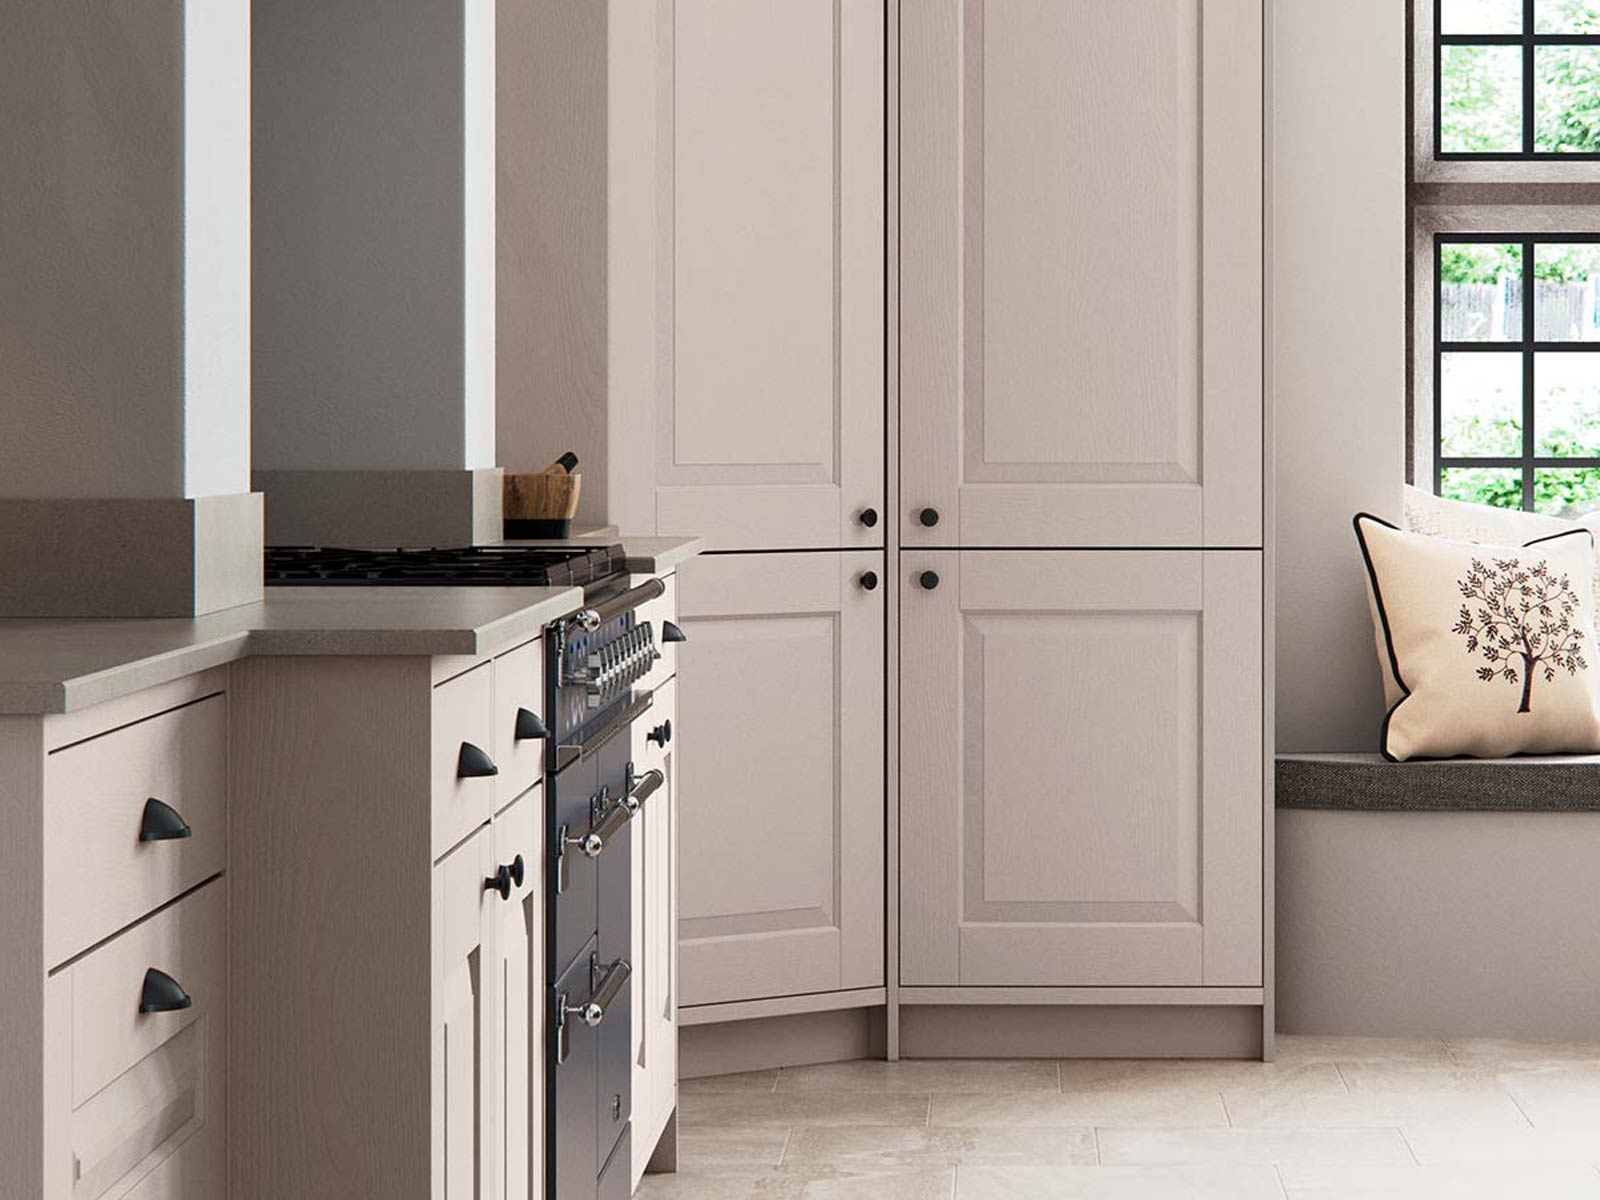 A classic kitchen featuring a corner pantry cupboard with light doors